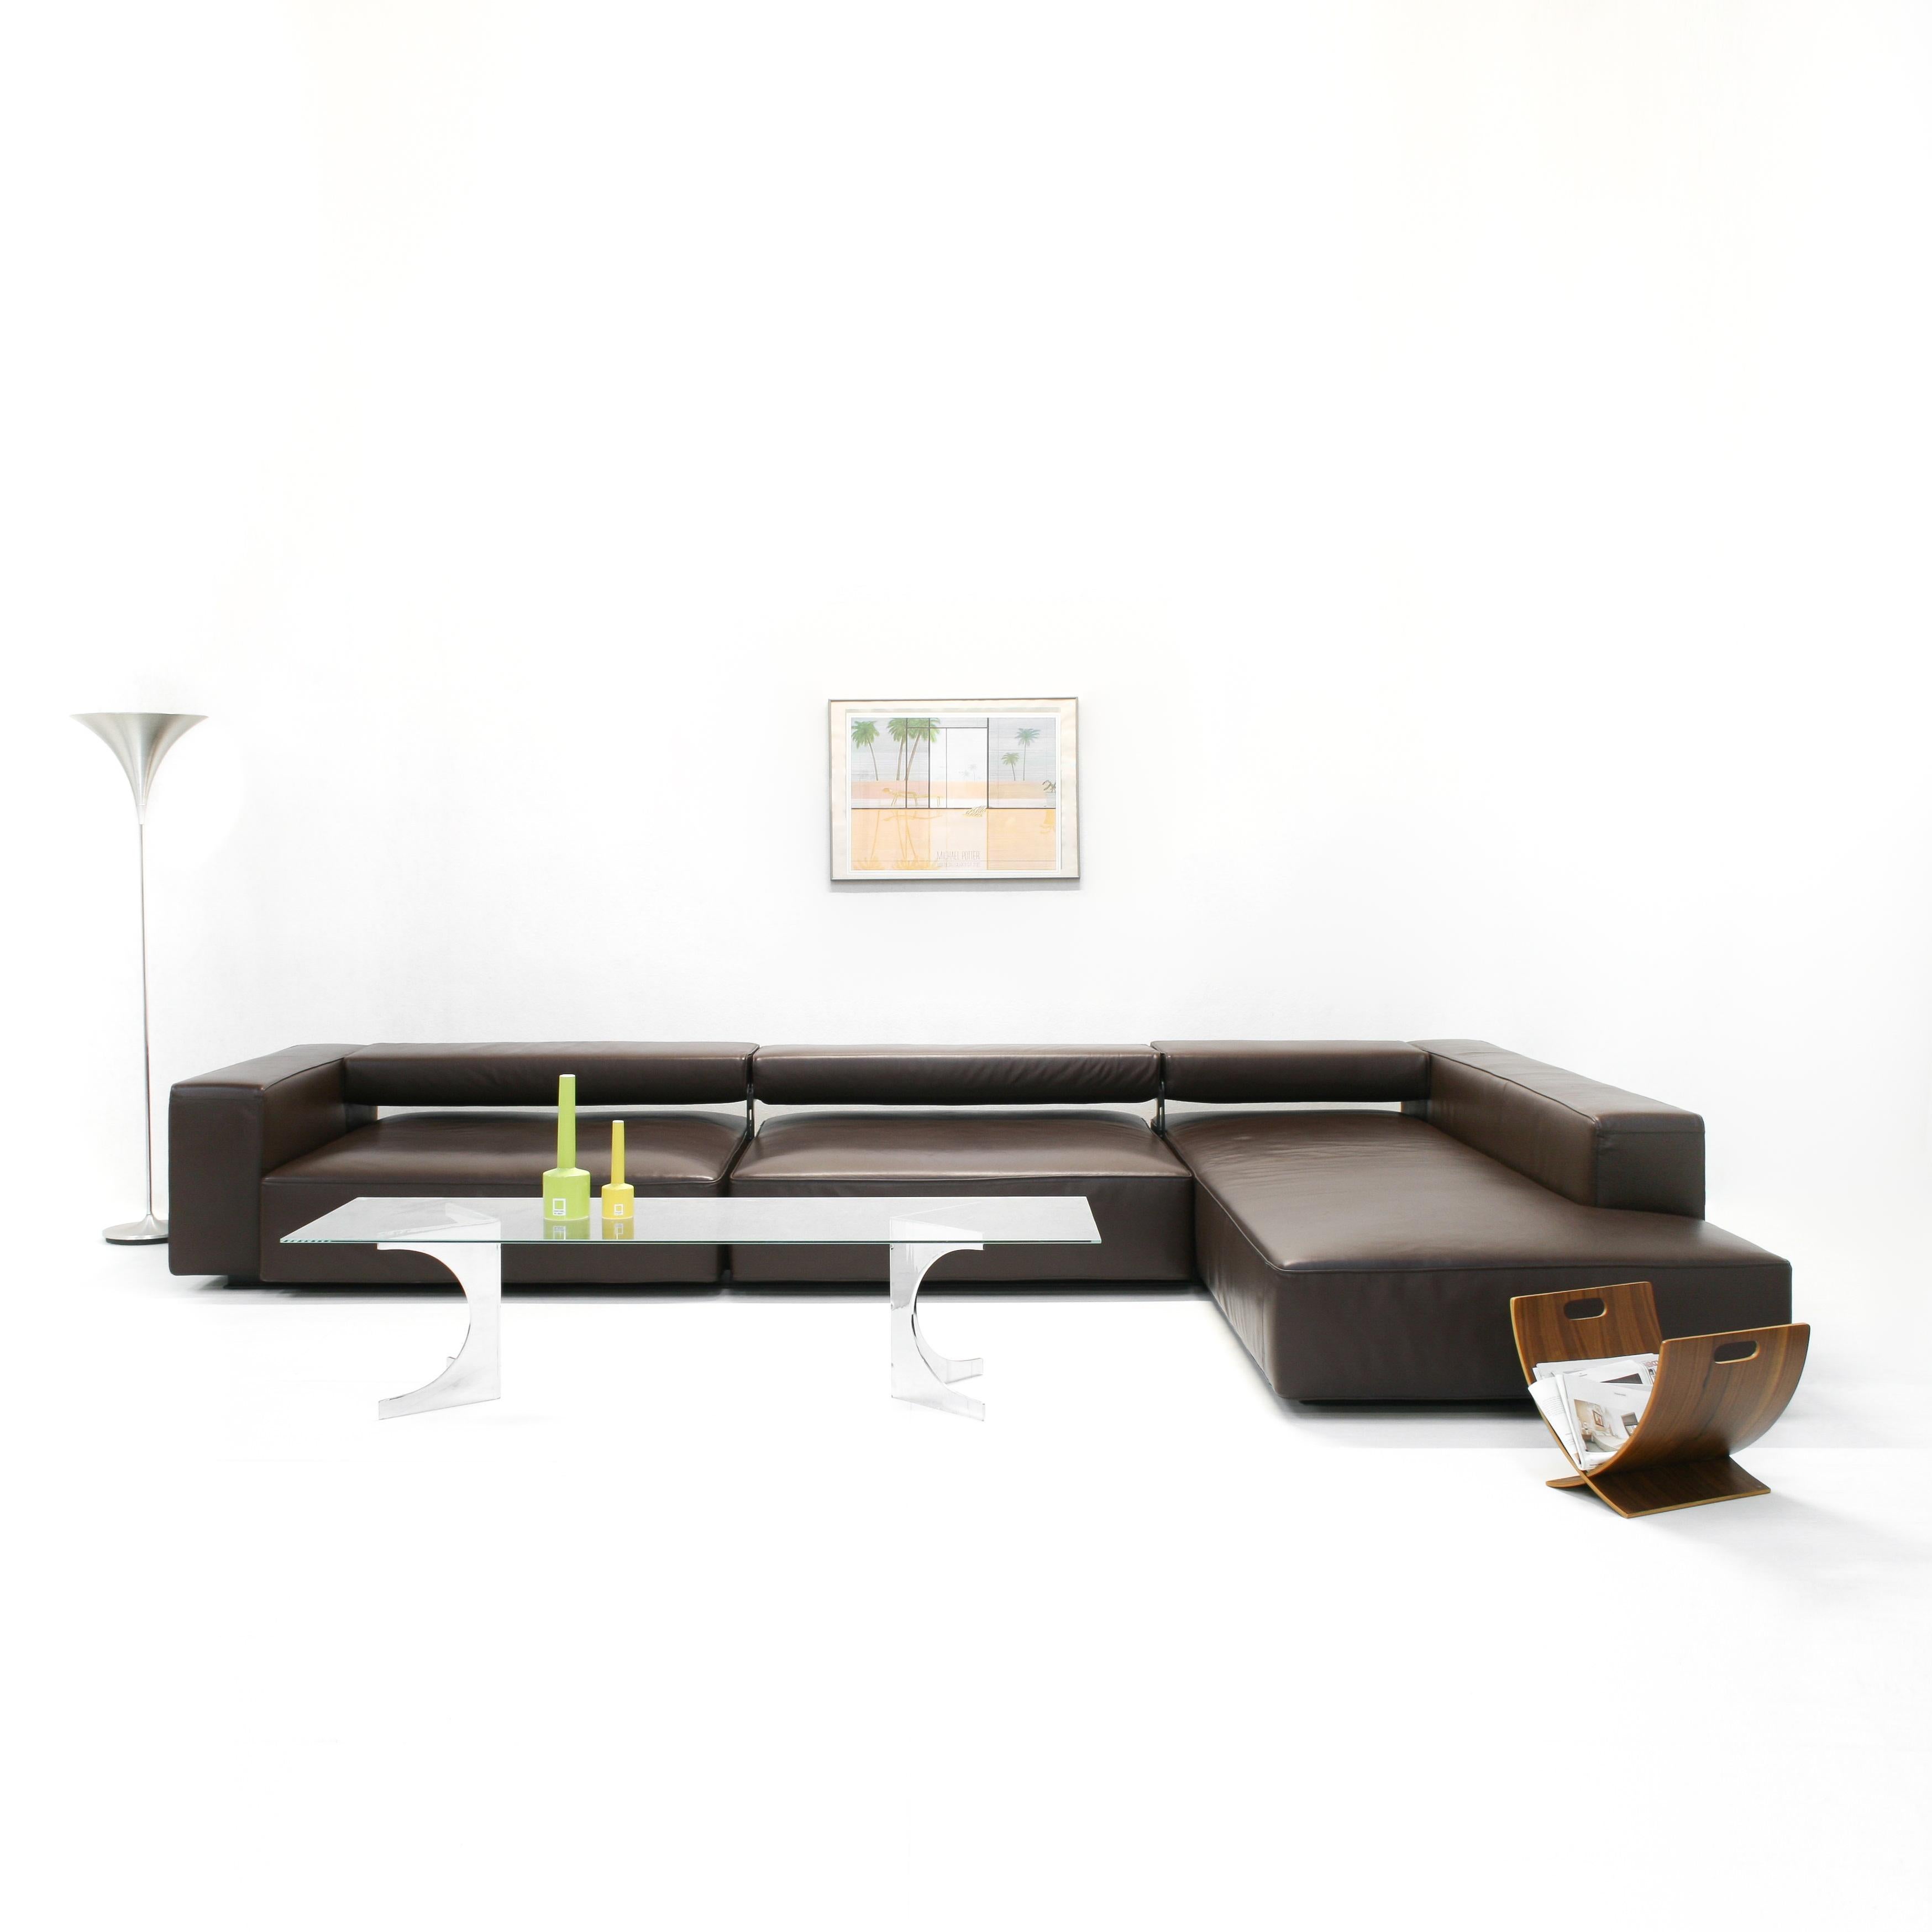 The Andy sofa was Paolo Piva's last design. This landscape sofa in chocolate brown leather with adjustable seat depth and chaise longue is generously proportioned. The back can change its inclination from a horizontal and more modern position to a